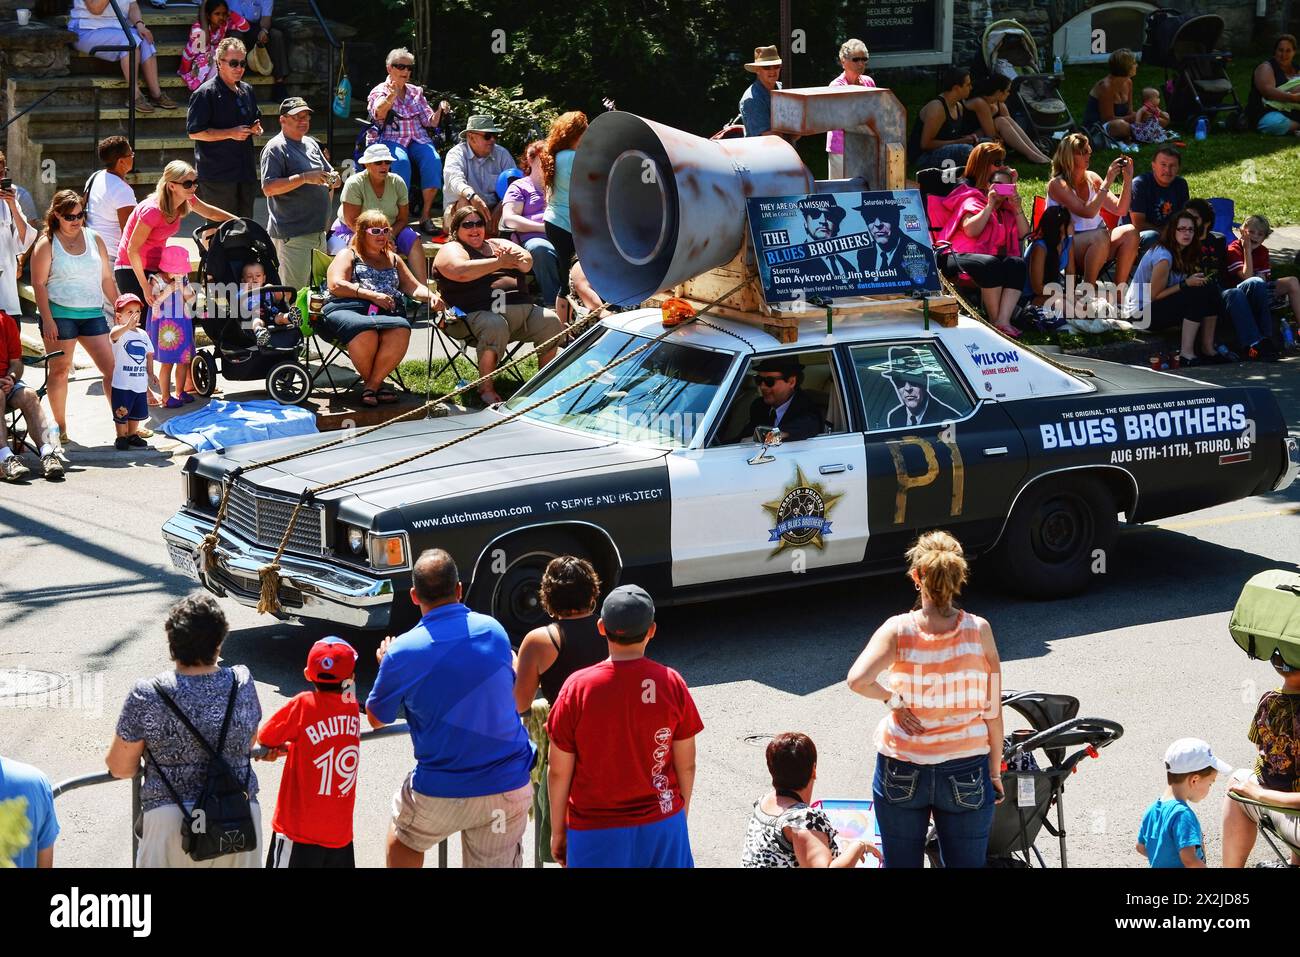 Dartmouth, Canada - August 5, 2013: The iconic Blues Brothers car is part of the annual Natal Day Parade in the Halifax Regional Municipality. They ar Stock Photo